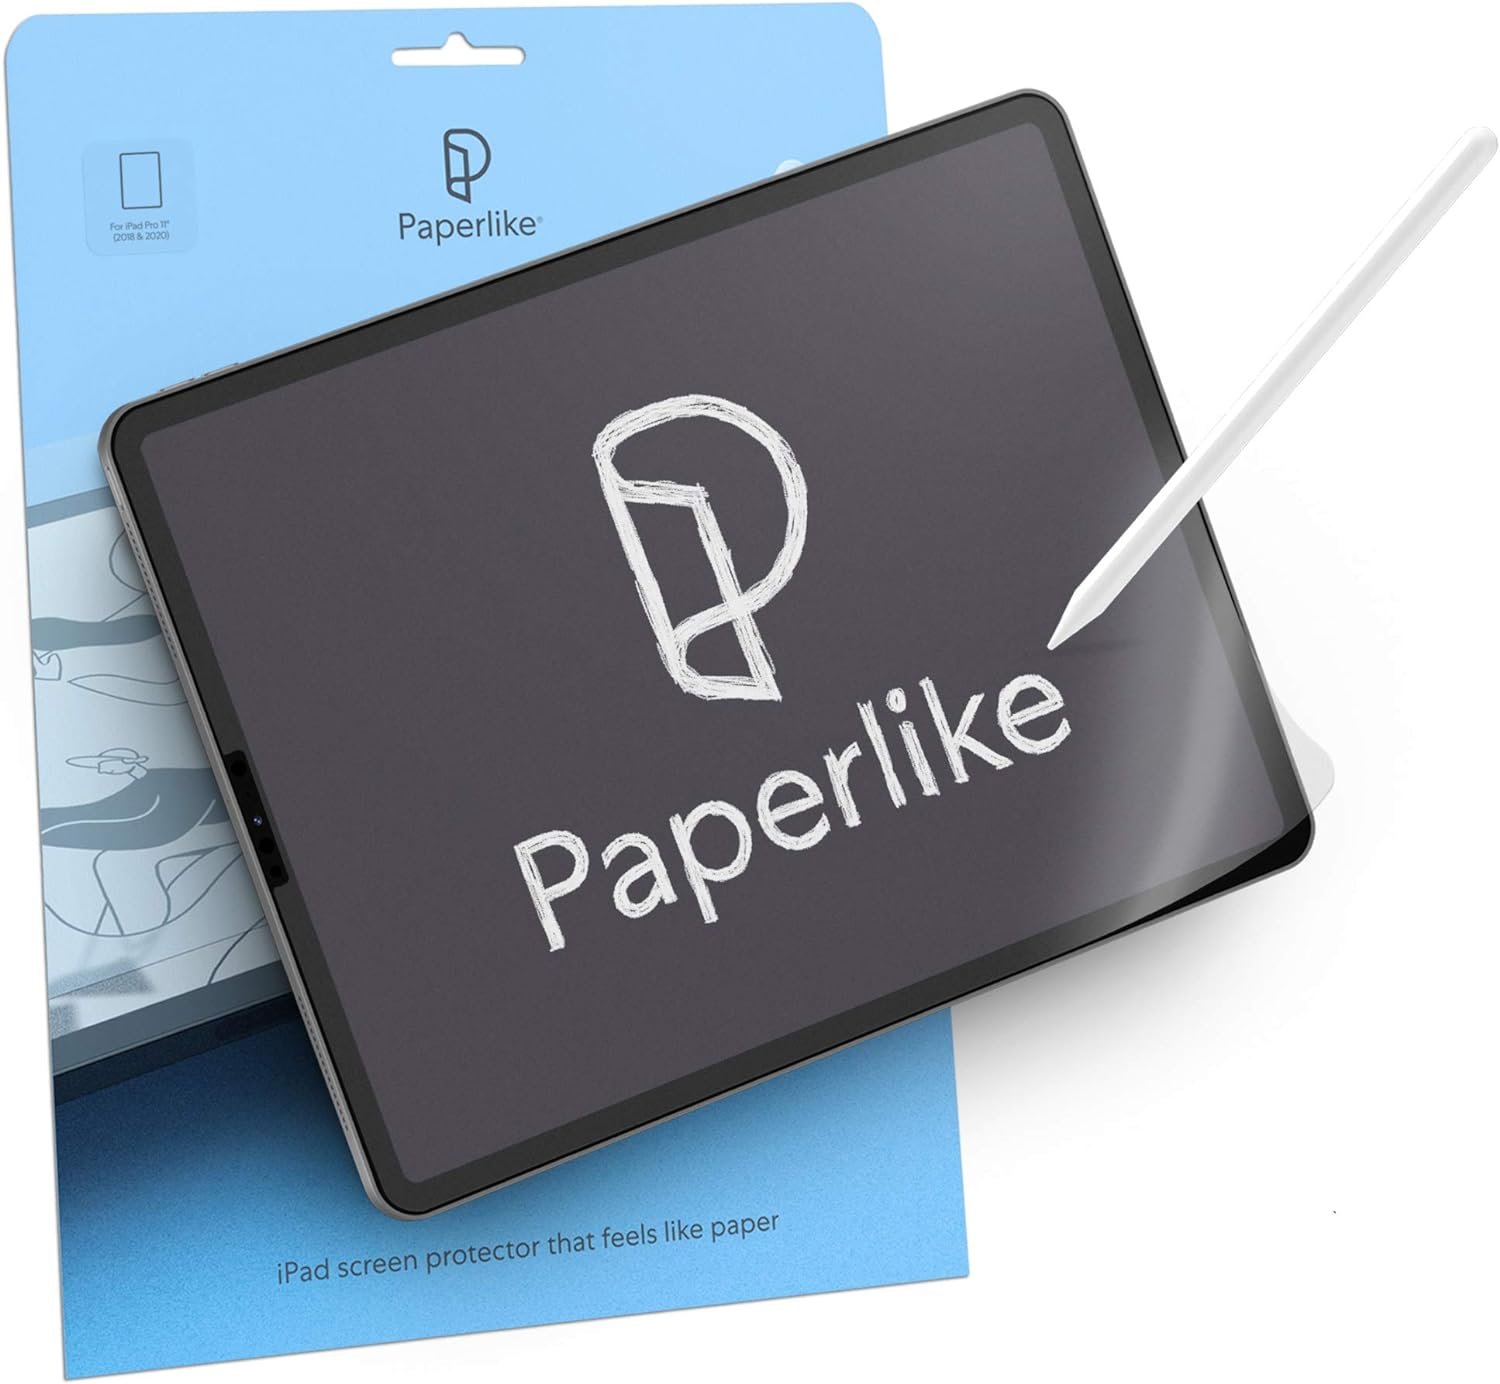 Paperlike Screen Protector for iPad*